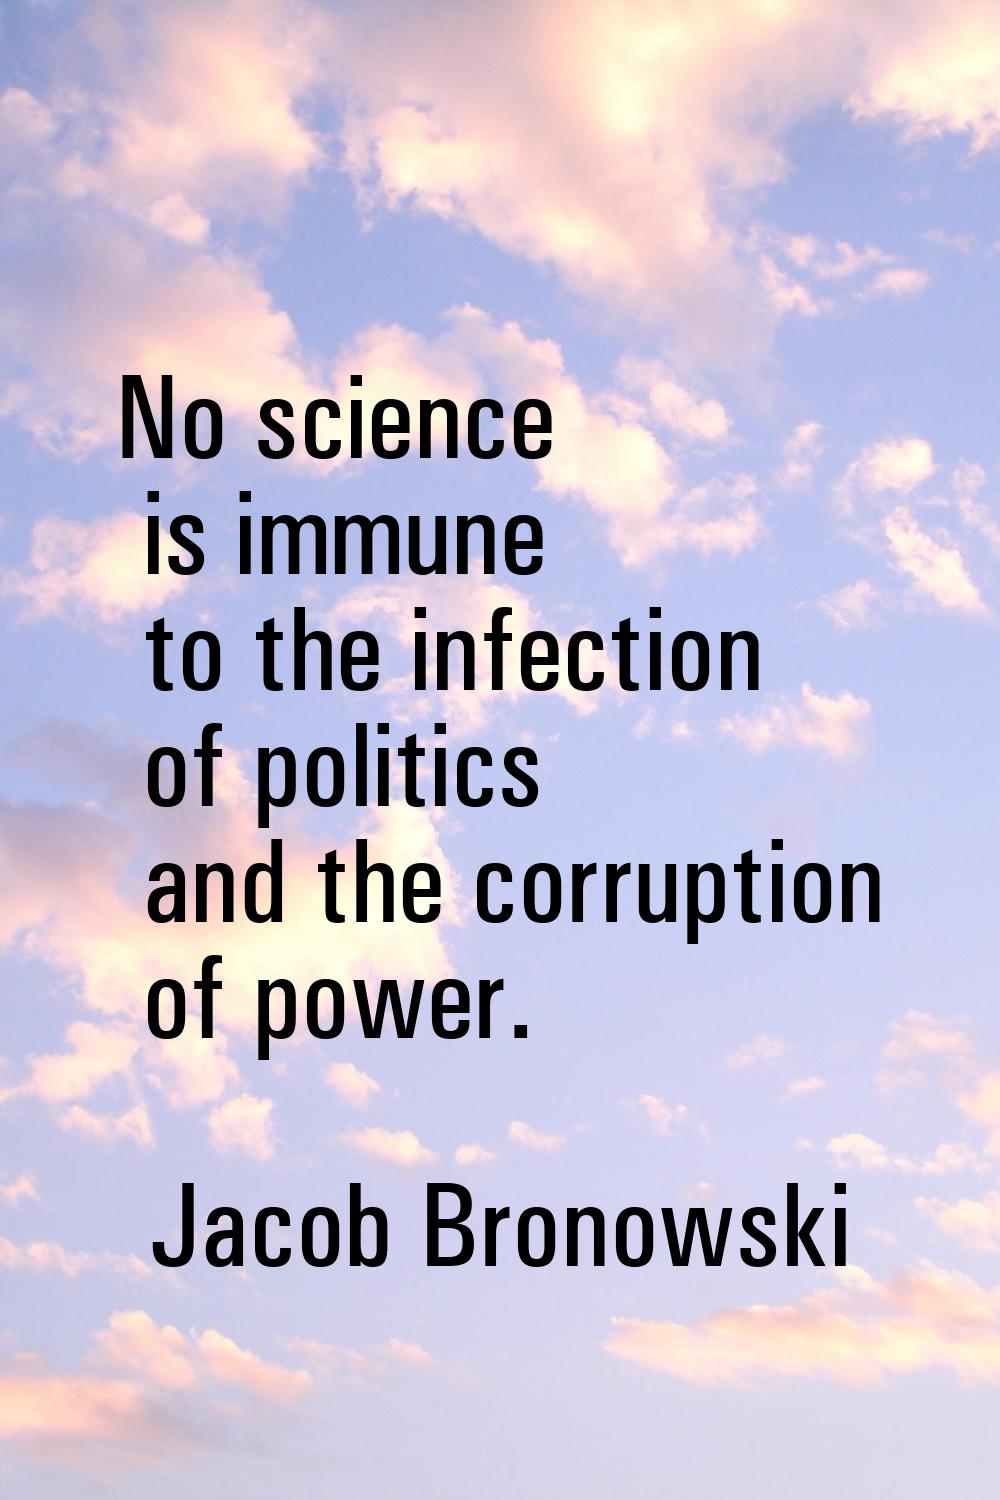 No science is immune to the infection of politics and the corruption of power.